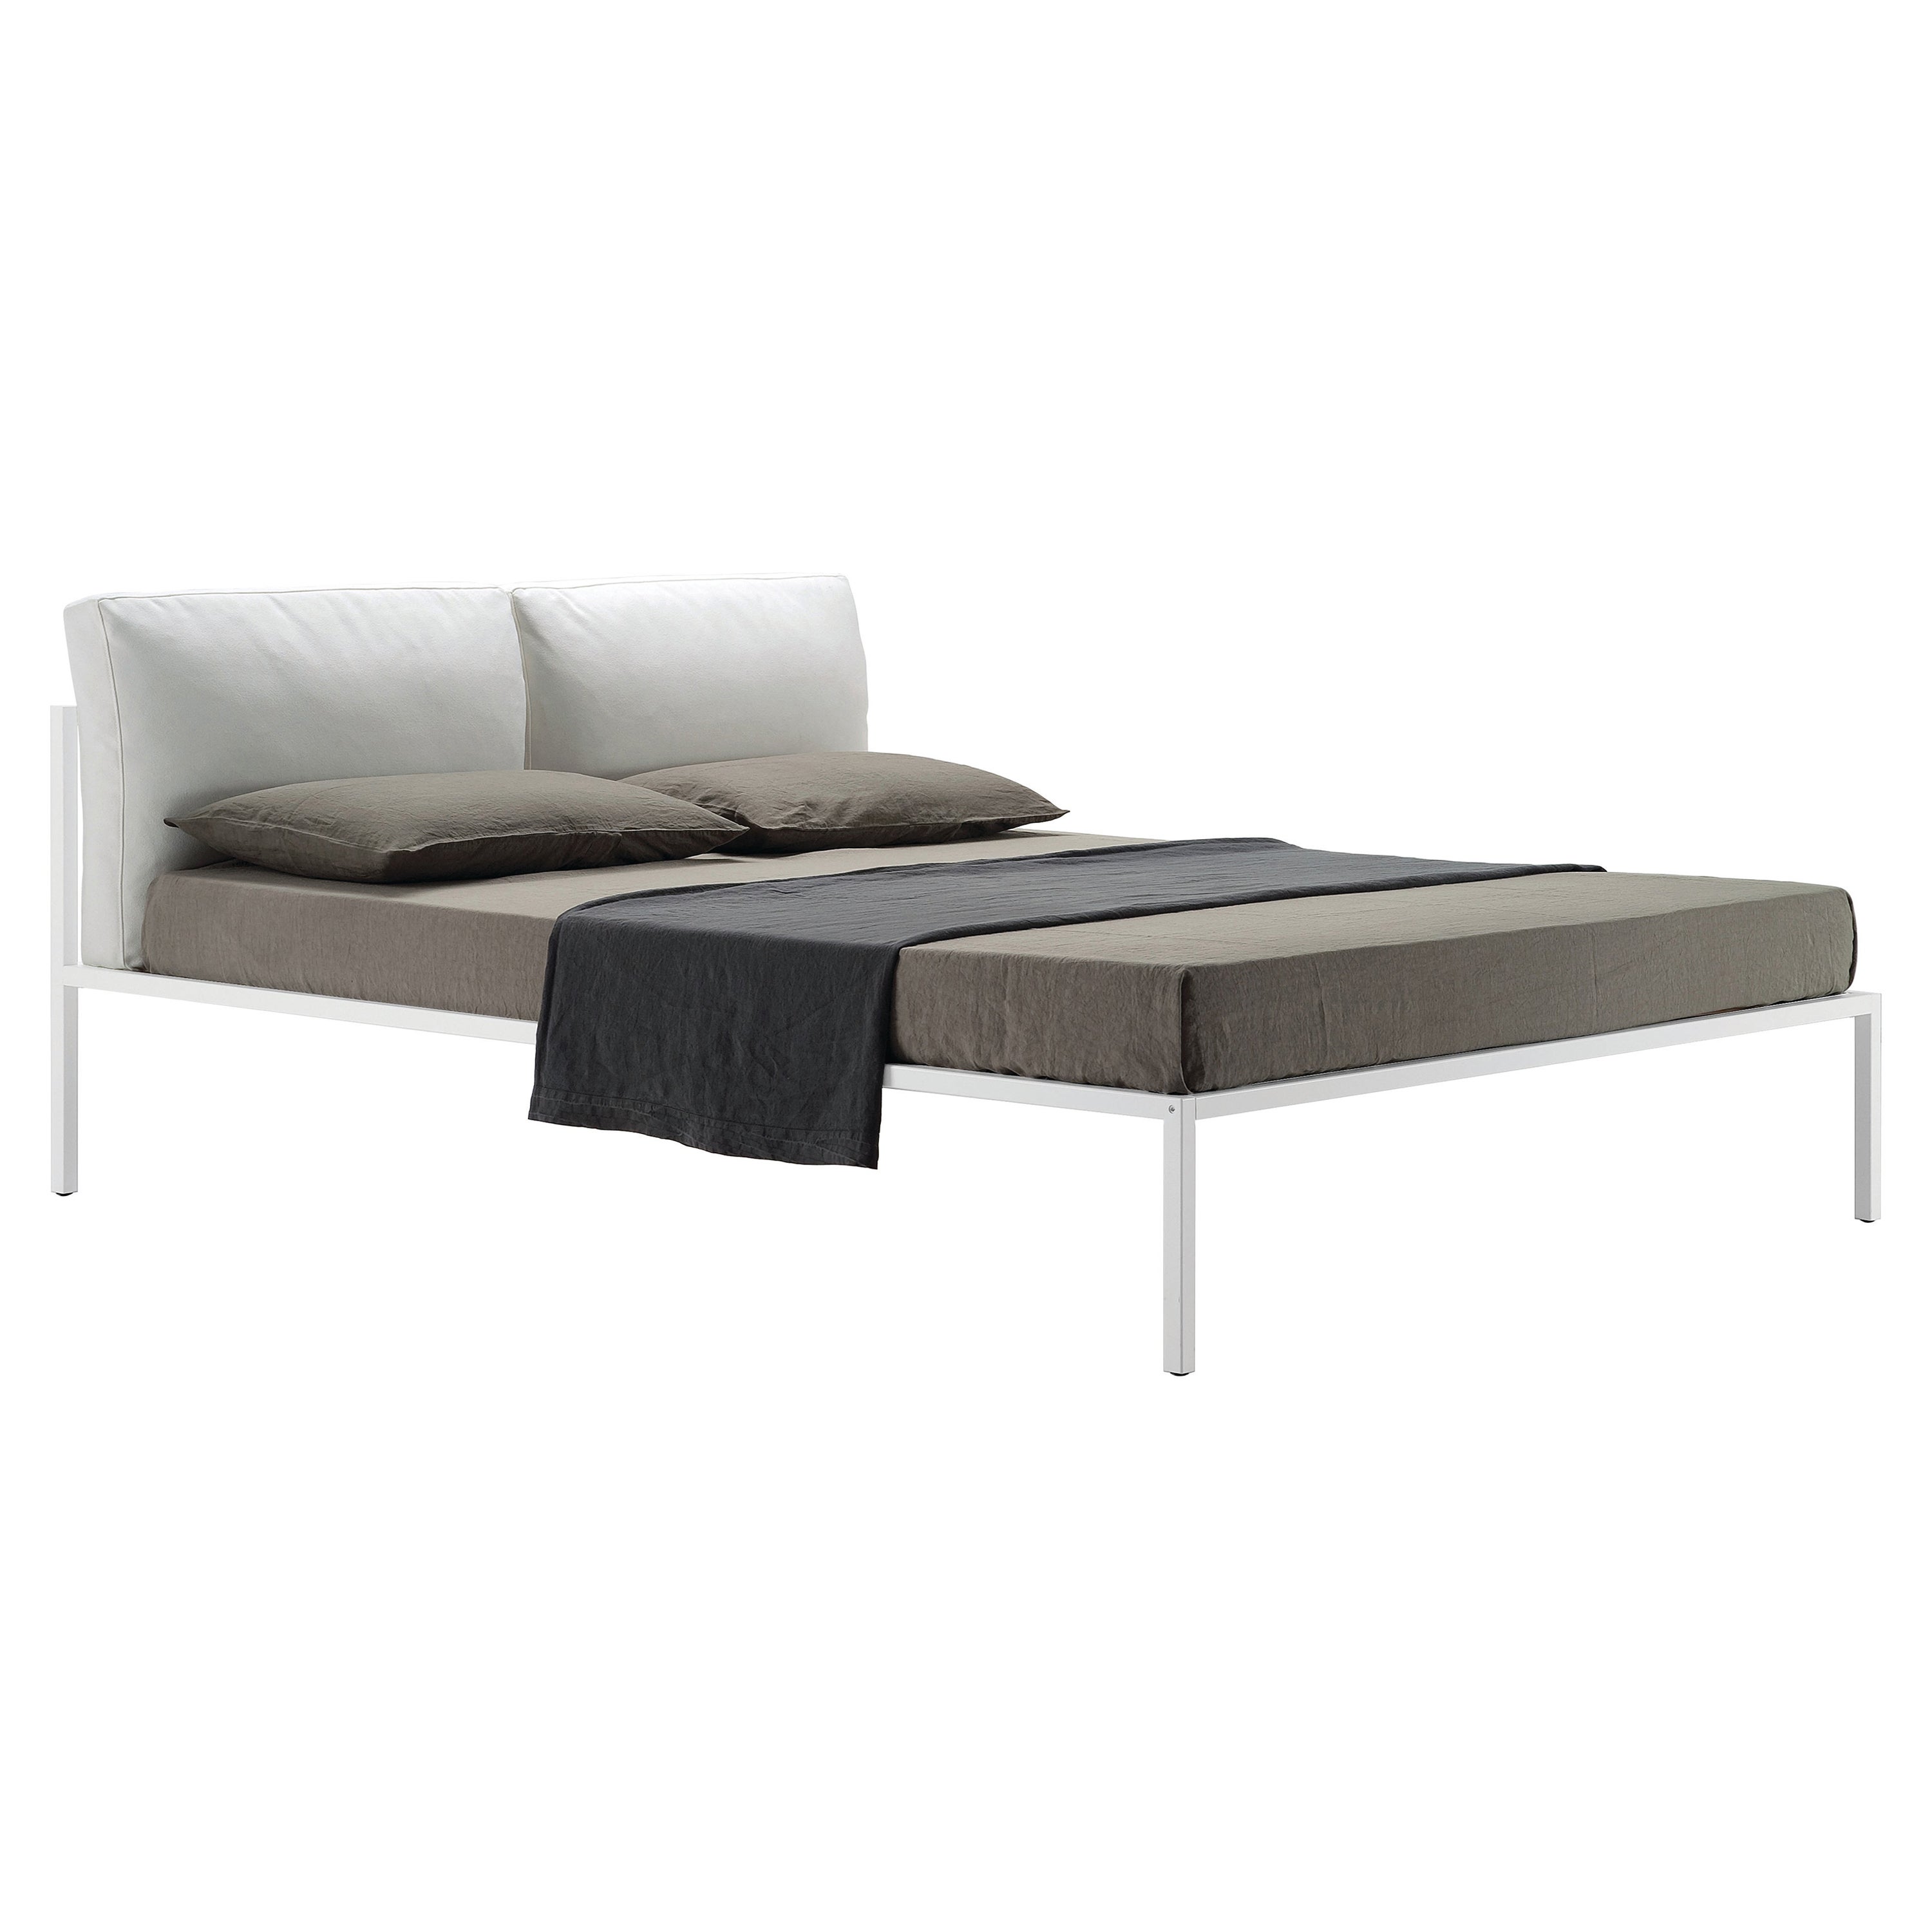 Zanotta Extra Large Nyx Bed in White Fabric with White Painted Steel Frame For Sale